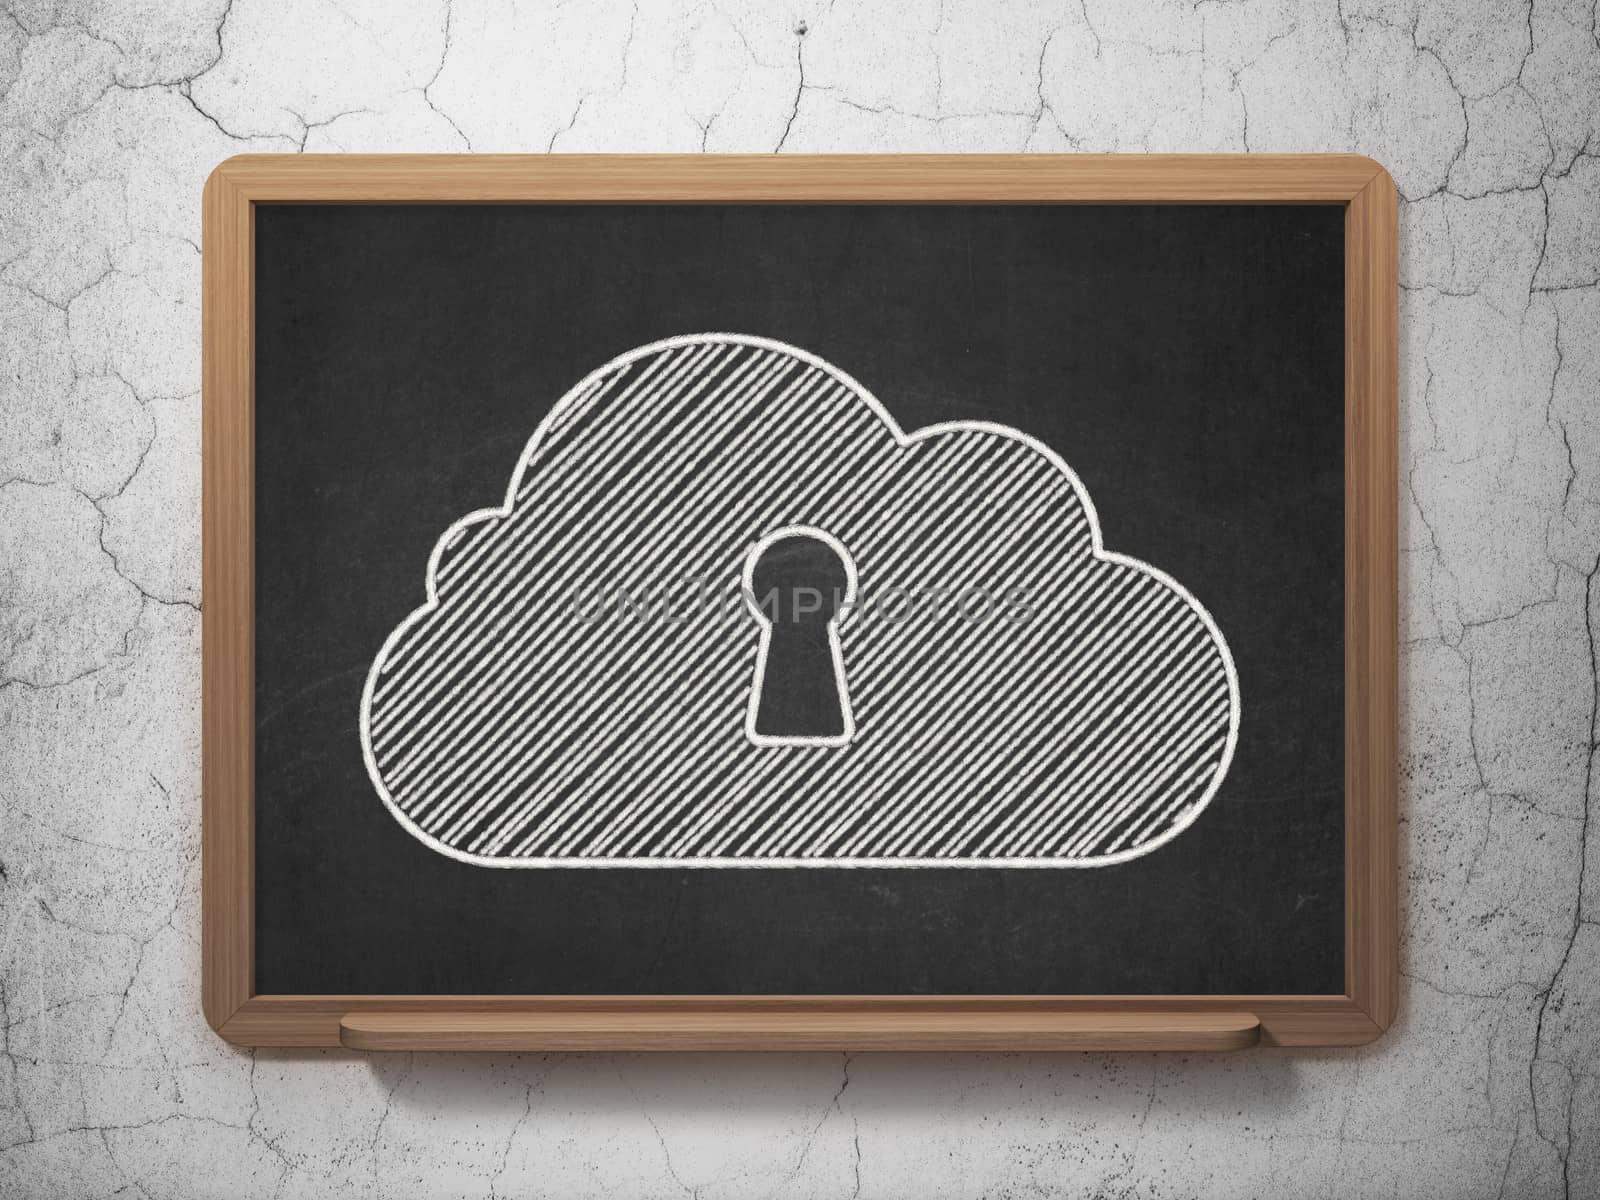 Cloud networking concept: Cloud With Keyhole icon on Black chalkboard on grunge wall background, 3d render